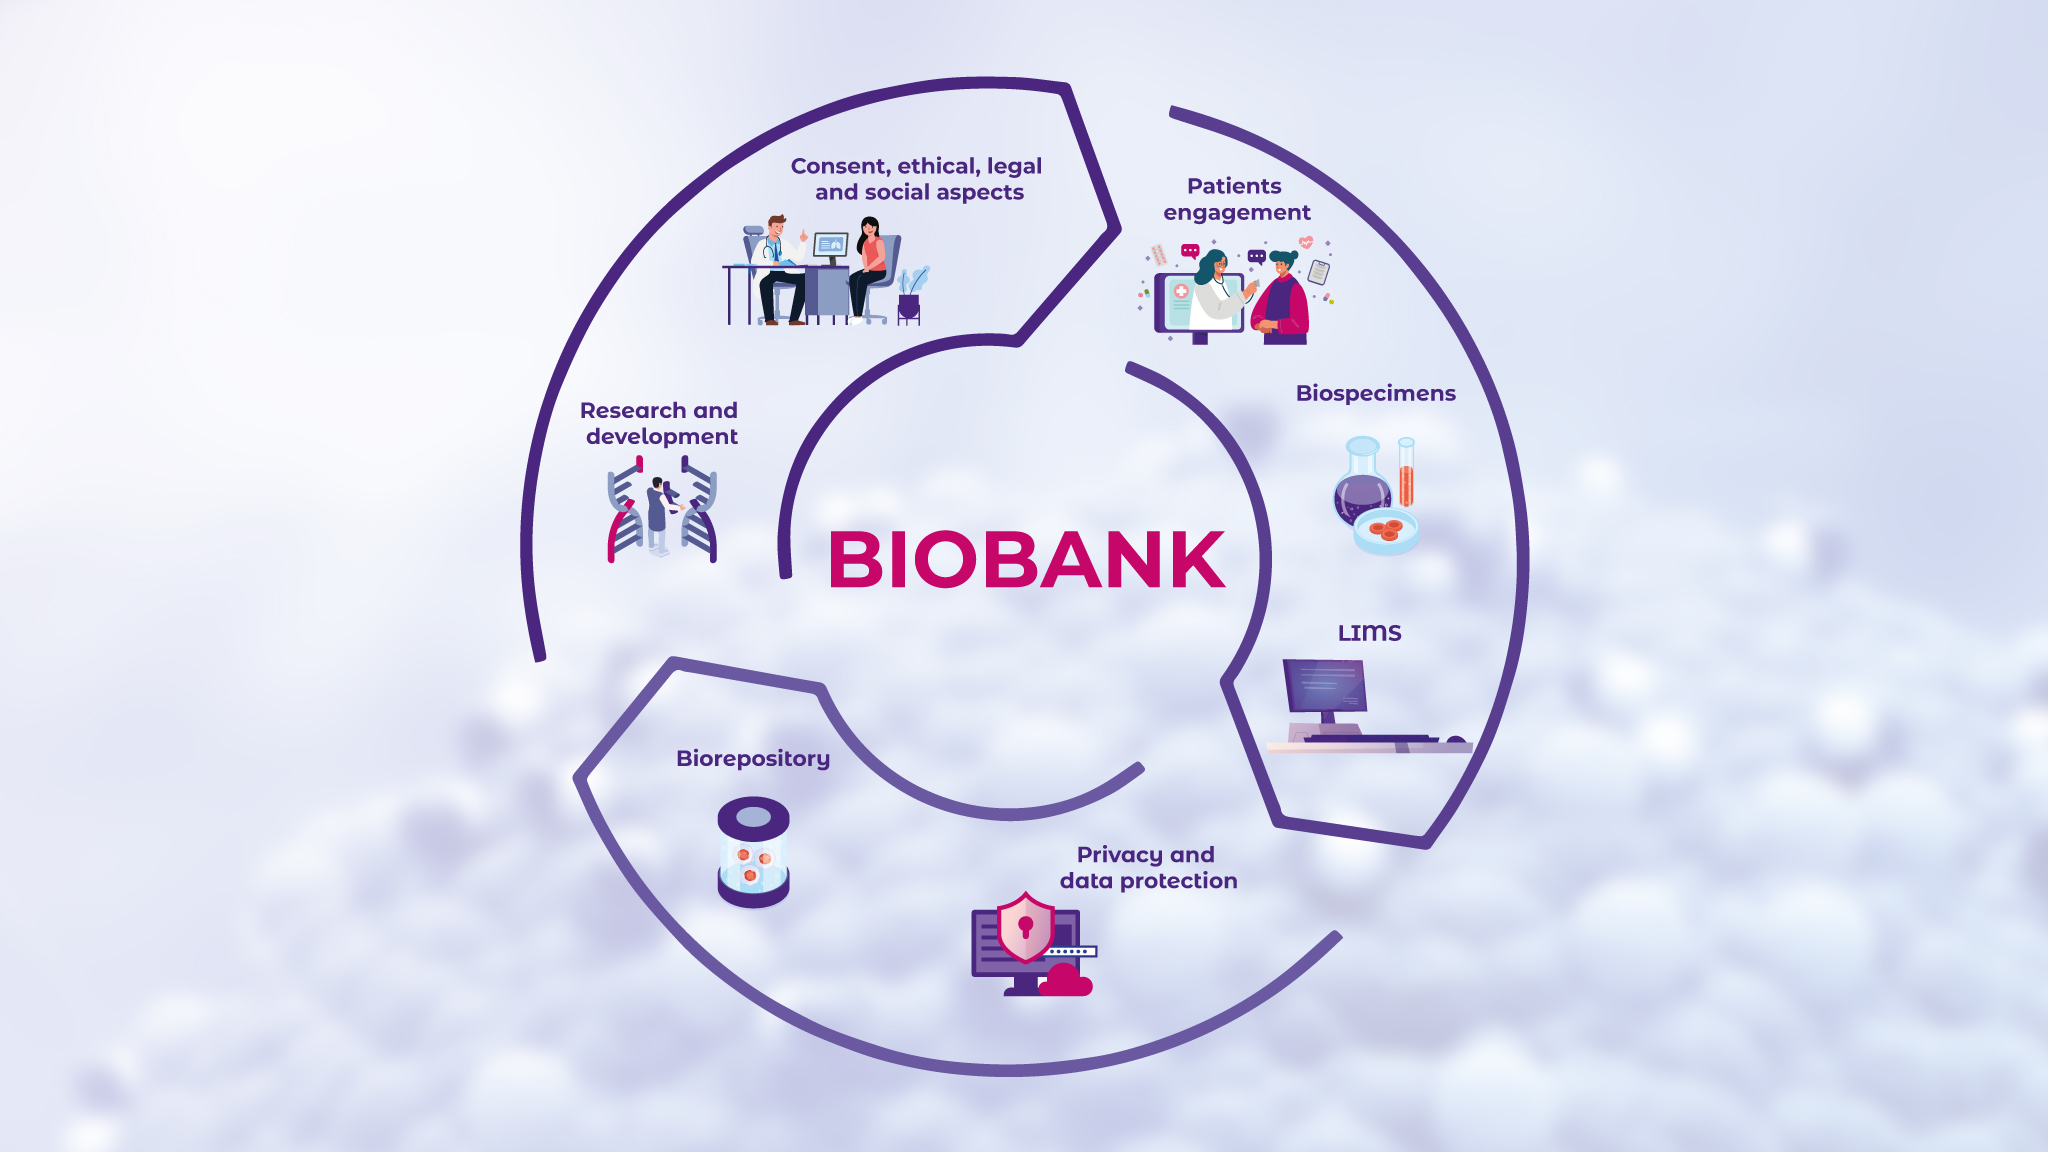 Figure 2. Overview of the biobanking process from consent and biosample collection to secure storage and use in drug development.